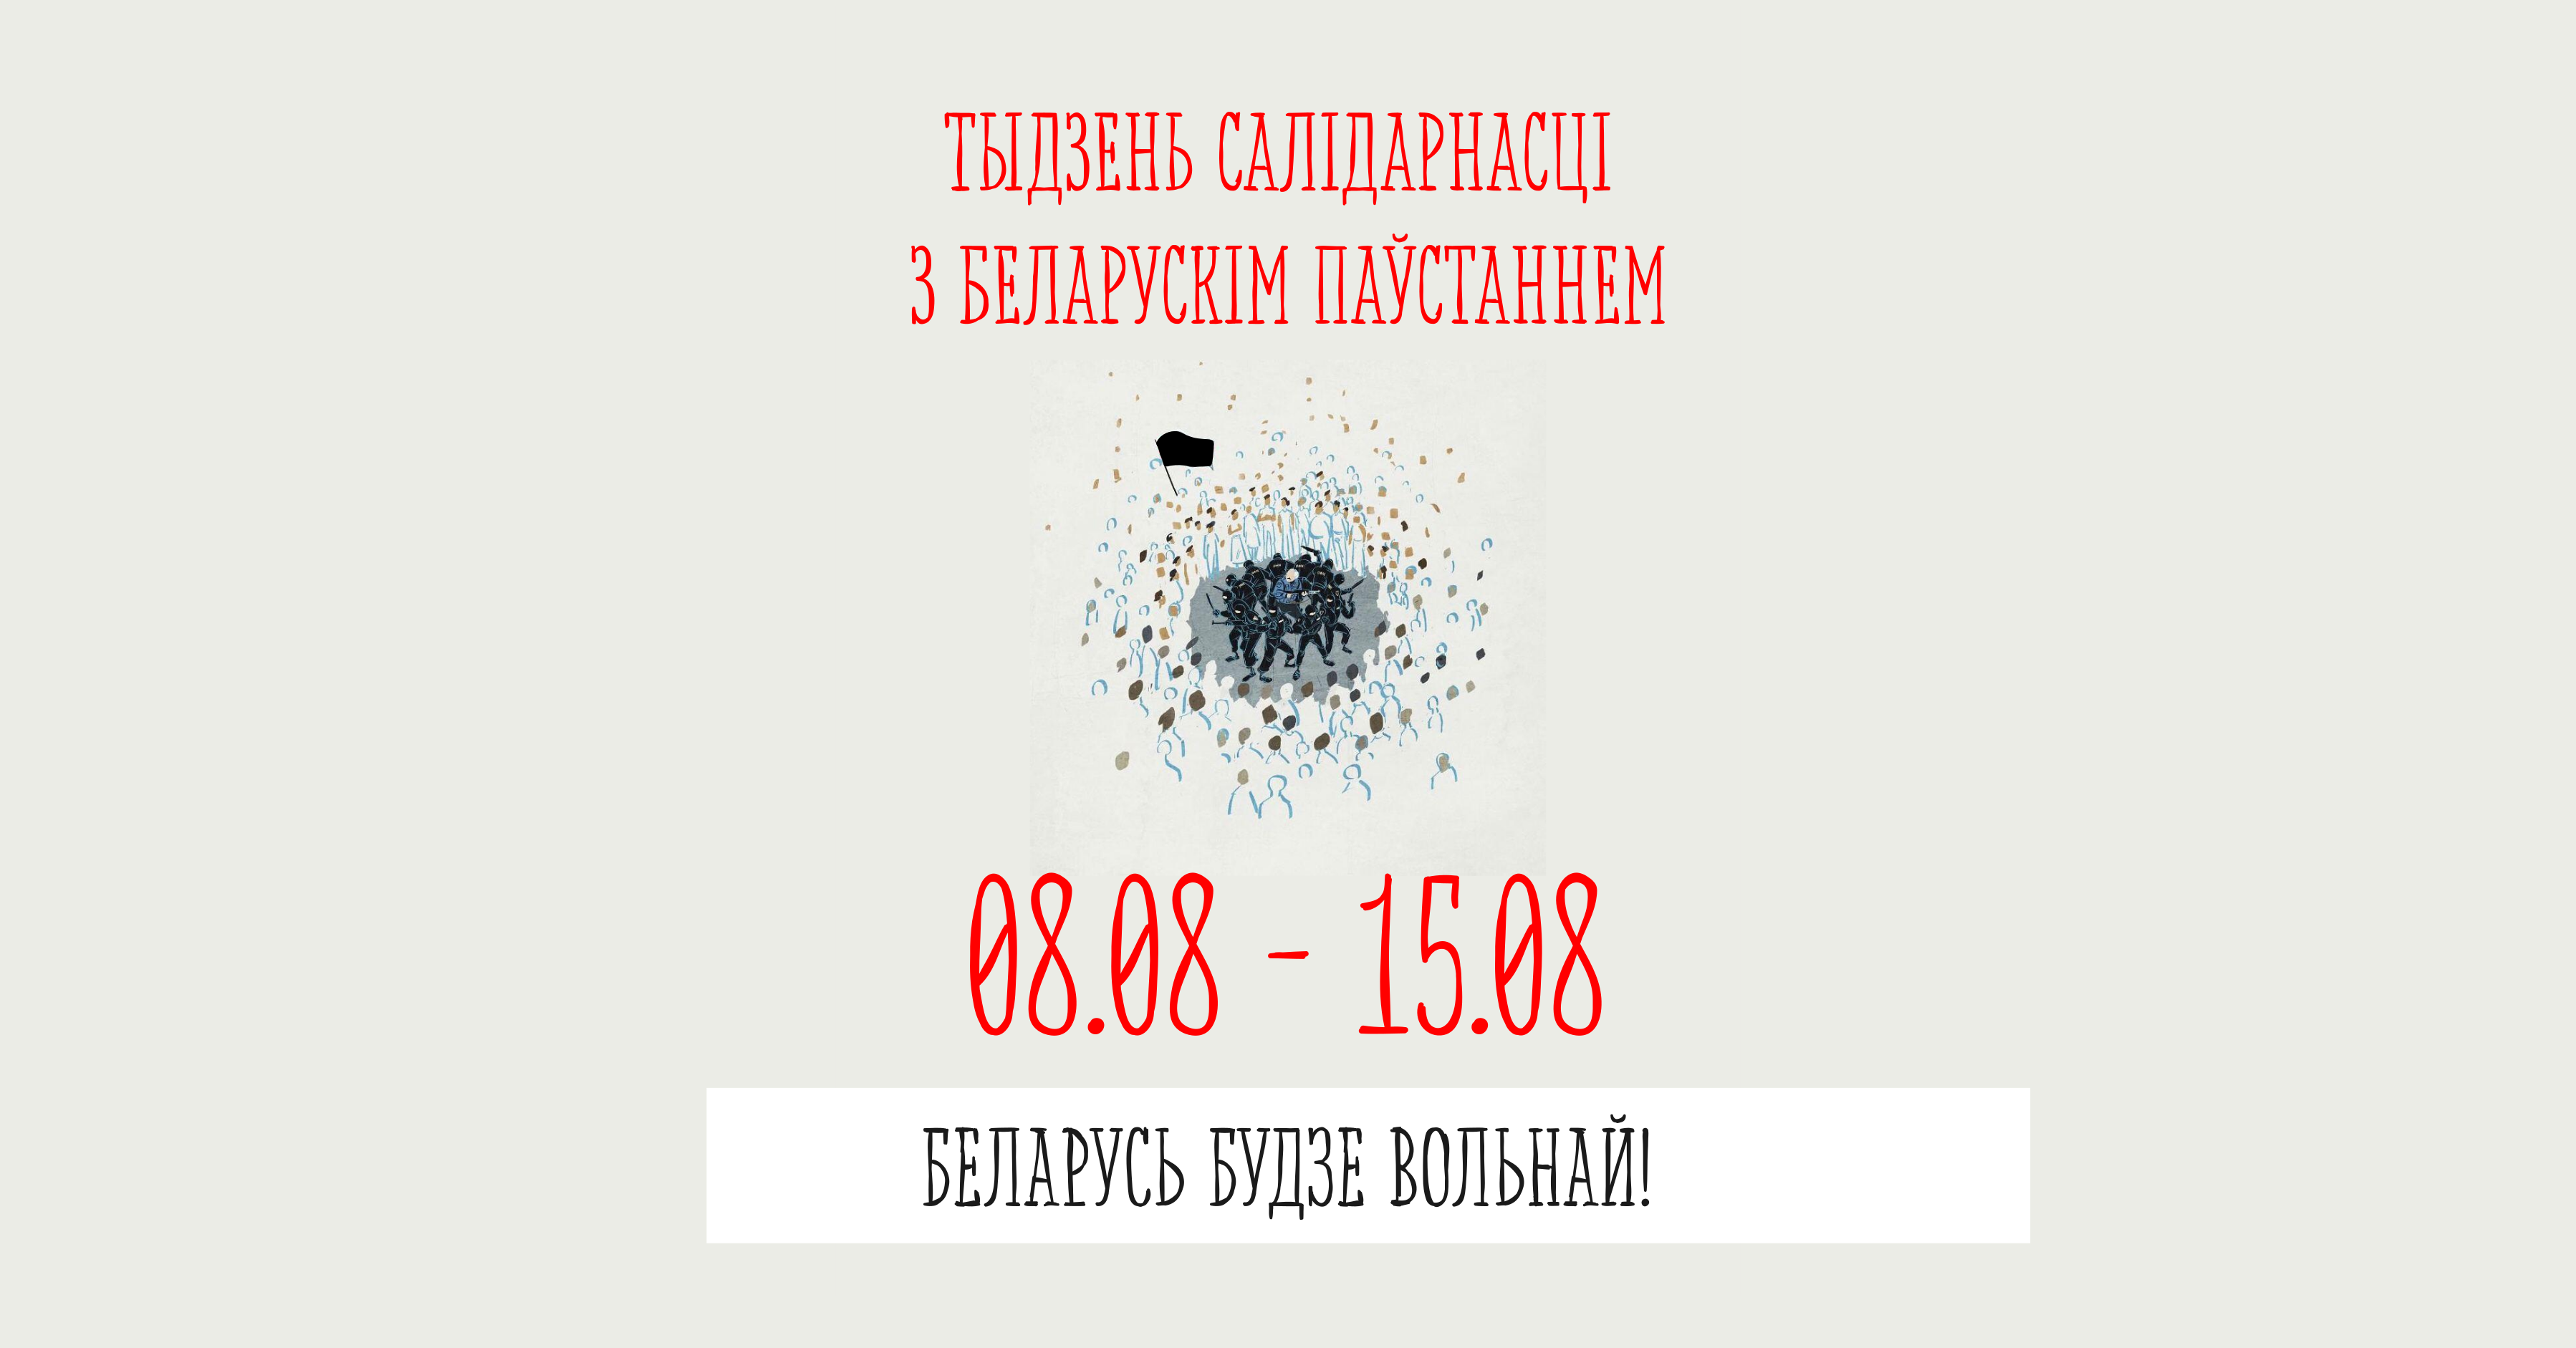 Call for a week of solidarity with the Belarus uprising of August 8-15